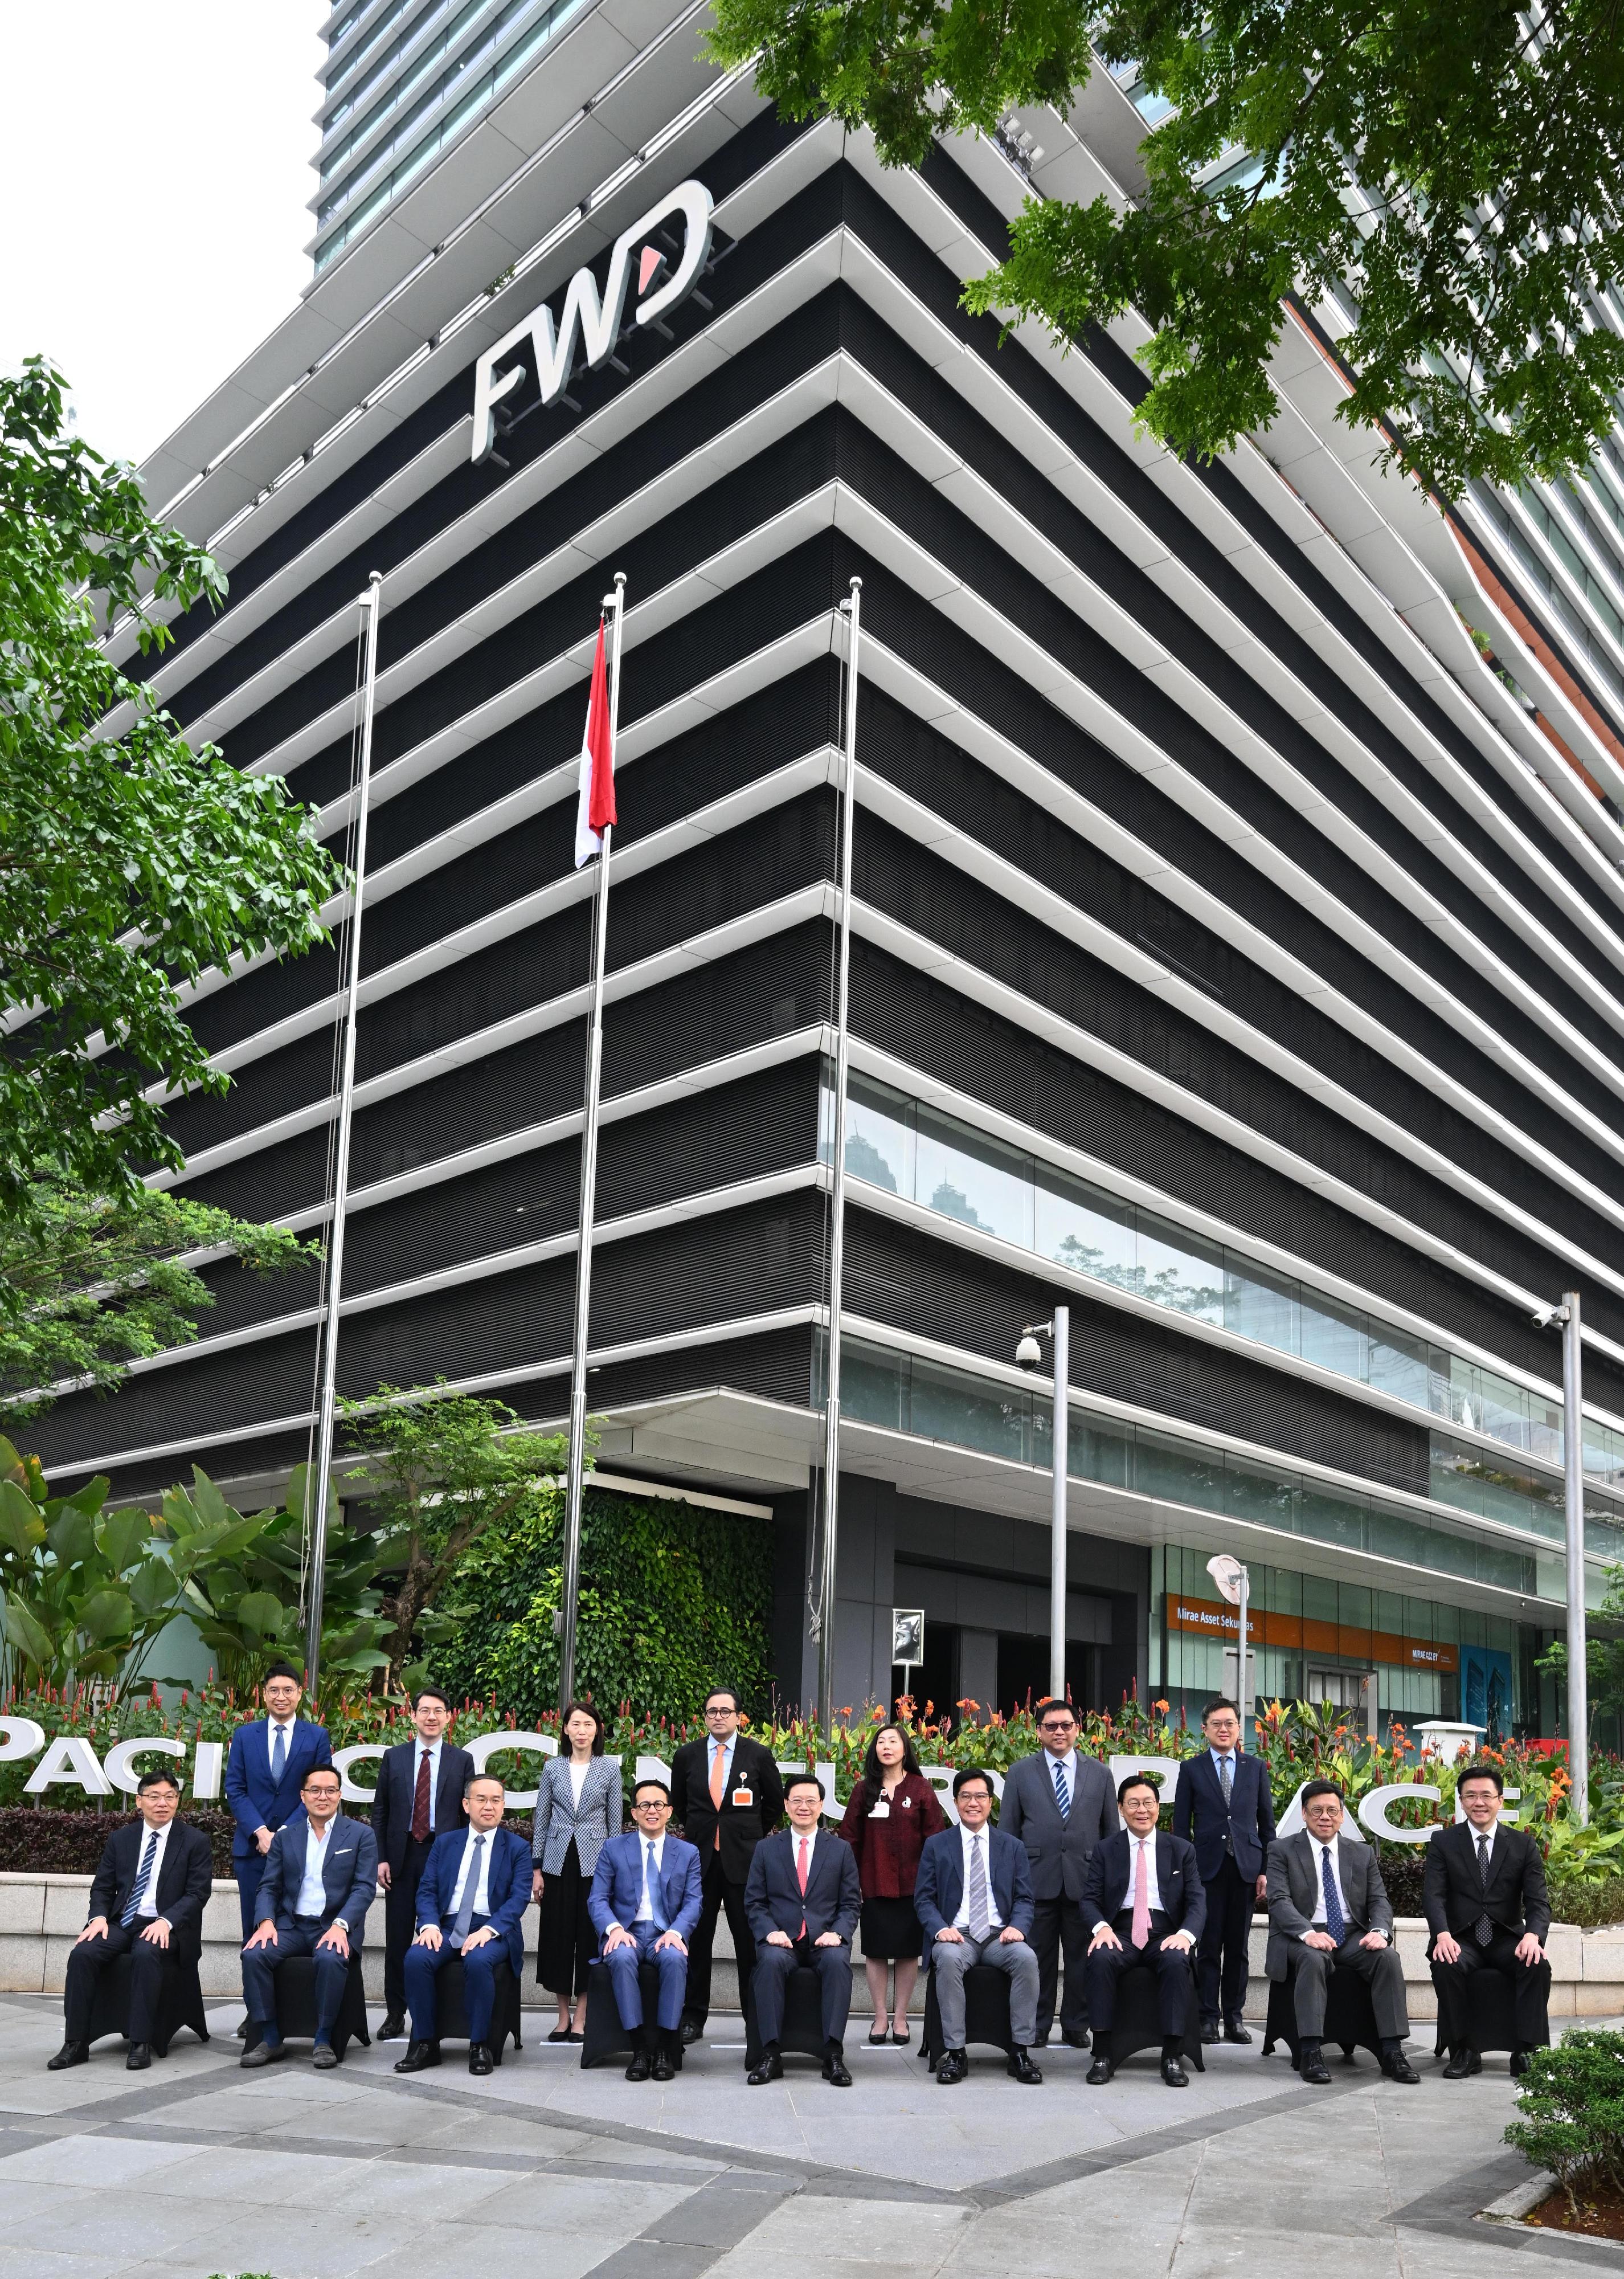 The Chief Executive, Mr John Lee, and a Hong Kong Special Administrative Region delegation visited the local office of a Hong Kong insurance company, FWD Group, in Jakarta, Indonesia today (July 26). Photo shows Mr Lee (front row, centre); the Deputy Financial Secretary, Mr Michael Wong (front row, fourth right); the Secretary for Financial Services and the Treasury, Mr Christopher Hui (front row, third left); the Secretary for Commerce and Economic Development, Mr Algernon Yau (front row, second right); the Secretary for Transport and Logistics, Mr Lam Sai-hung (front row, first left), with the Chairman of Pacific Century Group, Mr Richard Li (front row, fourth left), and representatives of the company.